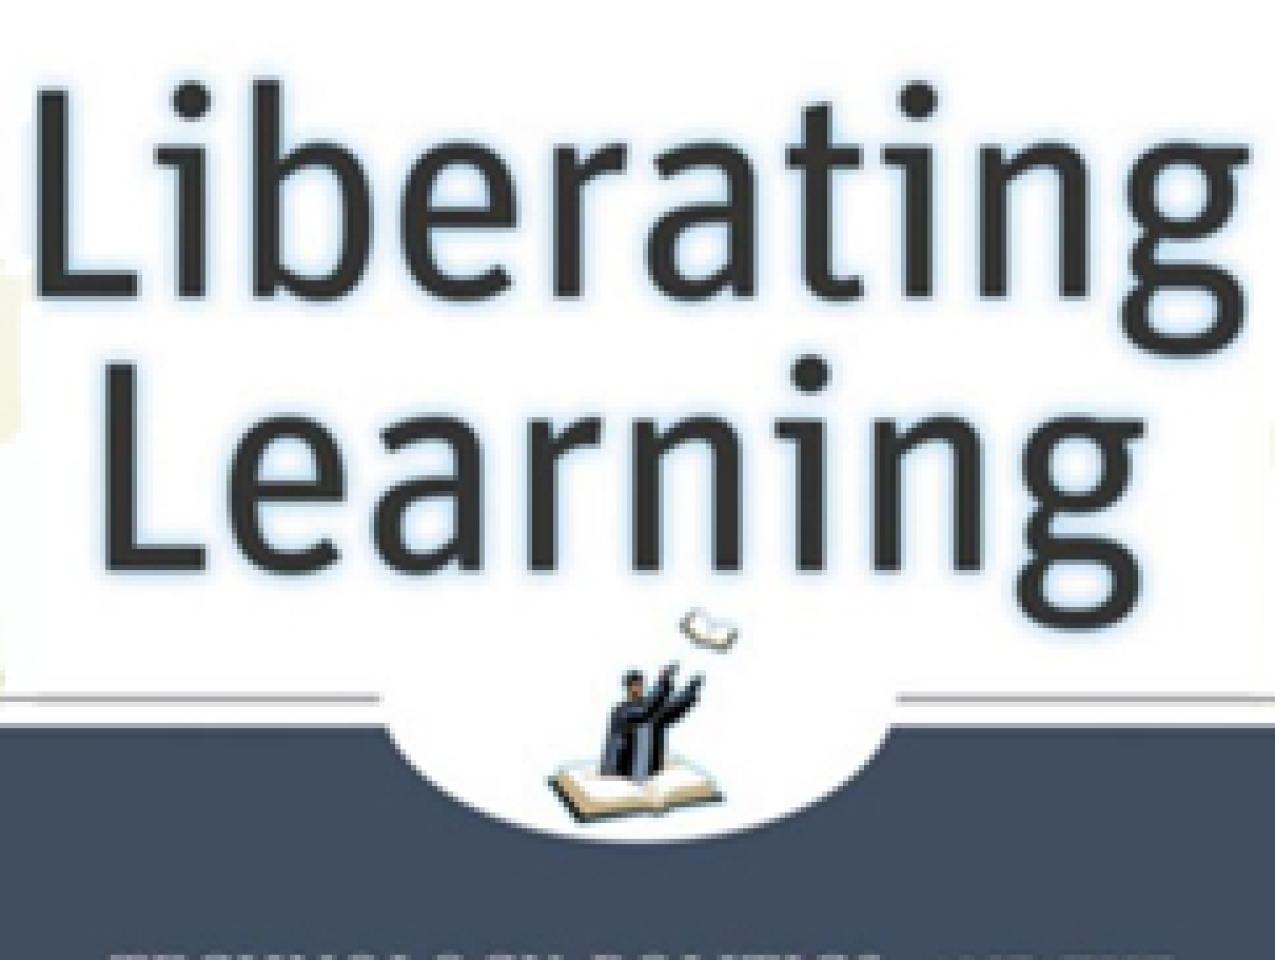 Liberating Learning: Technology, Politics, and the Future of American Education